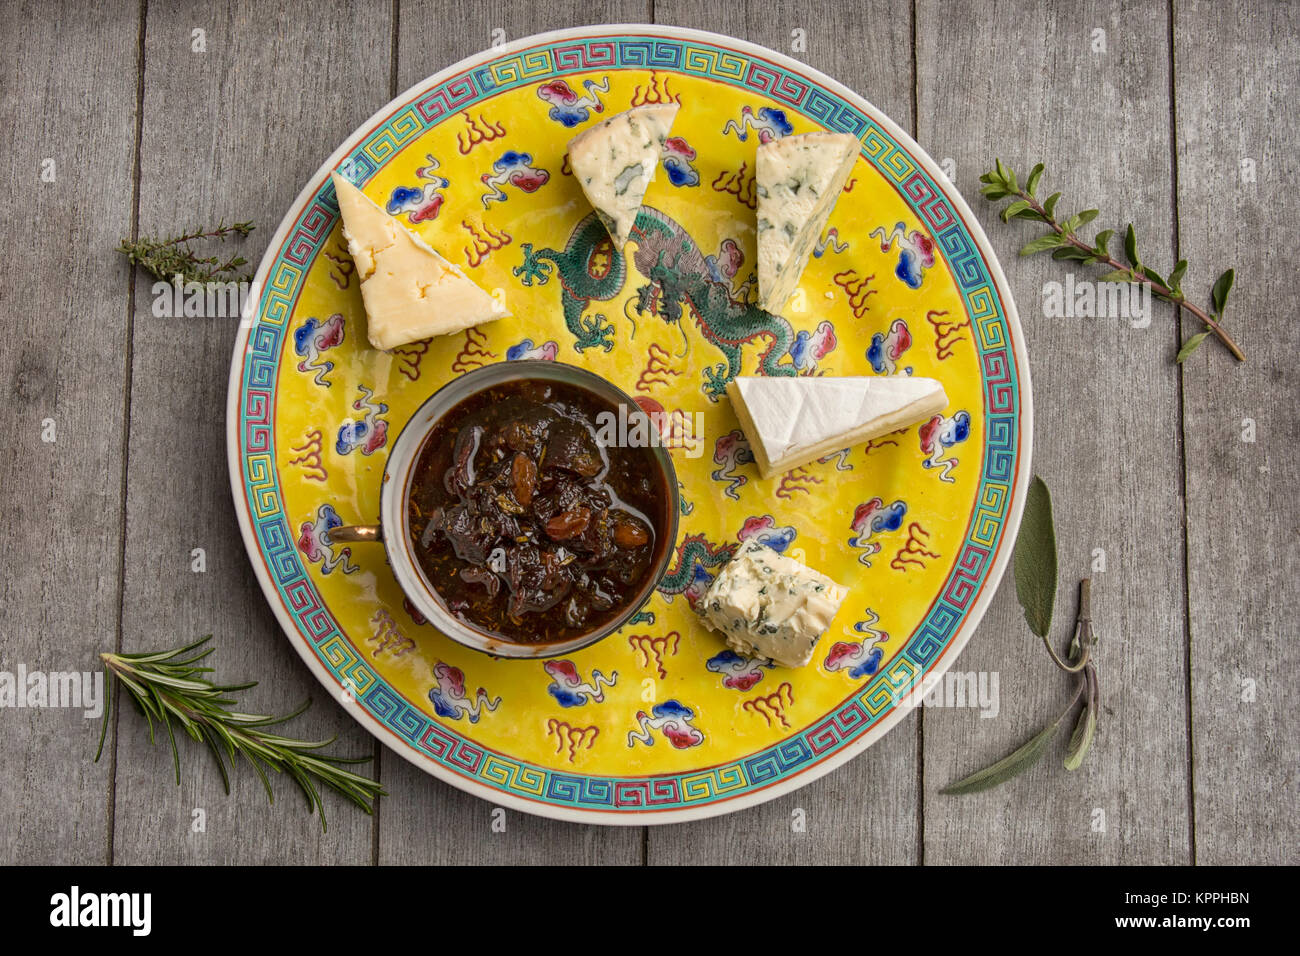 Plate with assortment of cheeses and home made herbal chutney Stock Photo